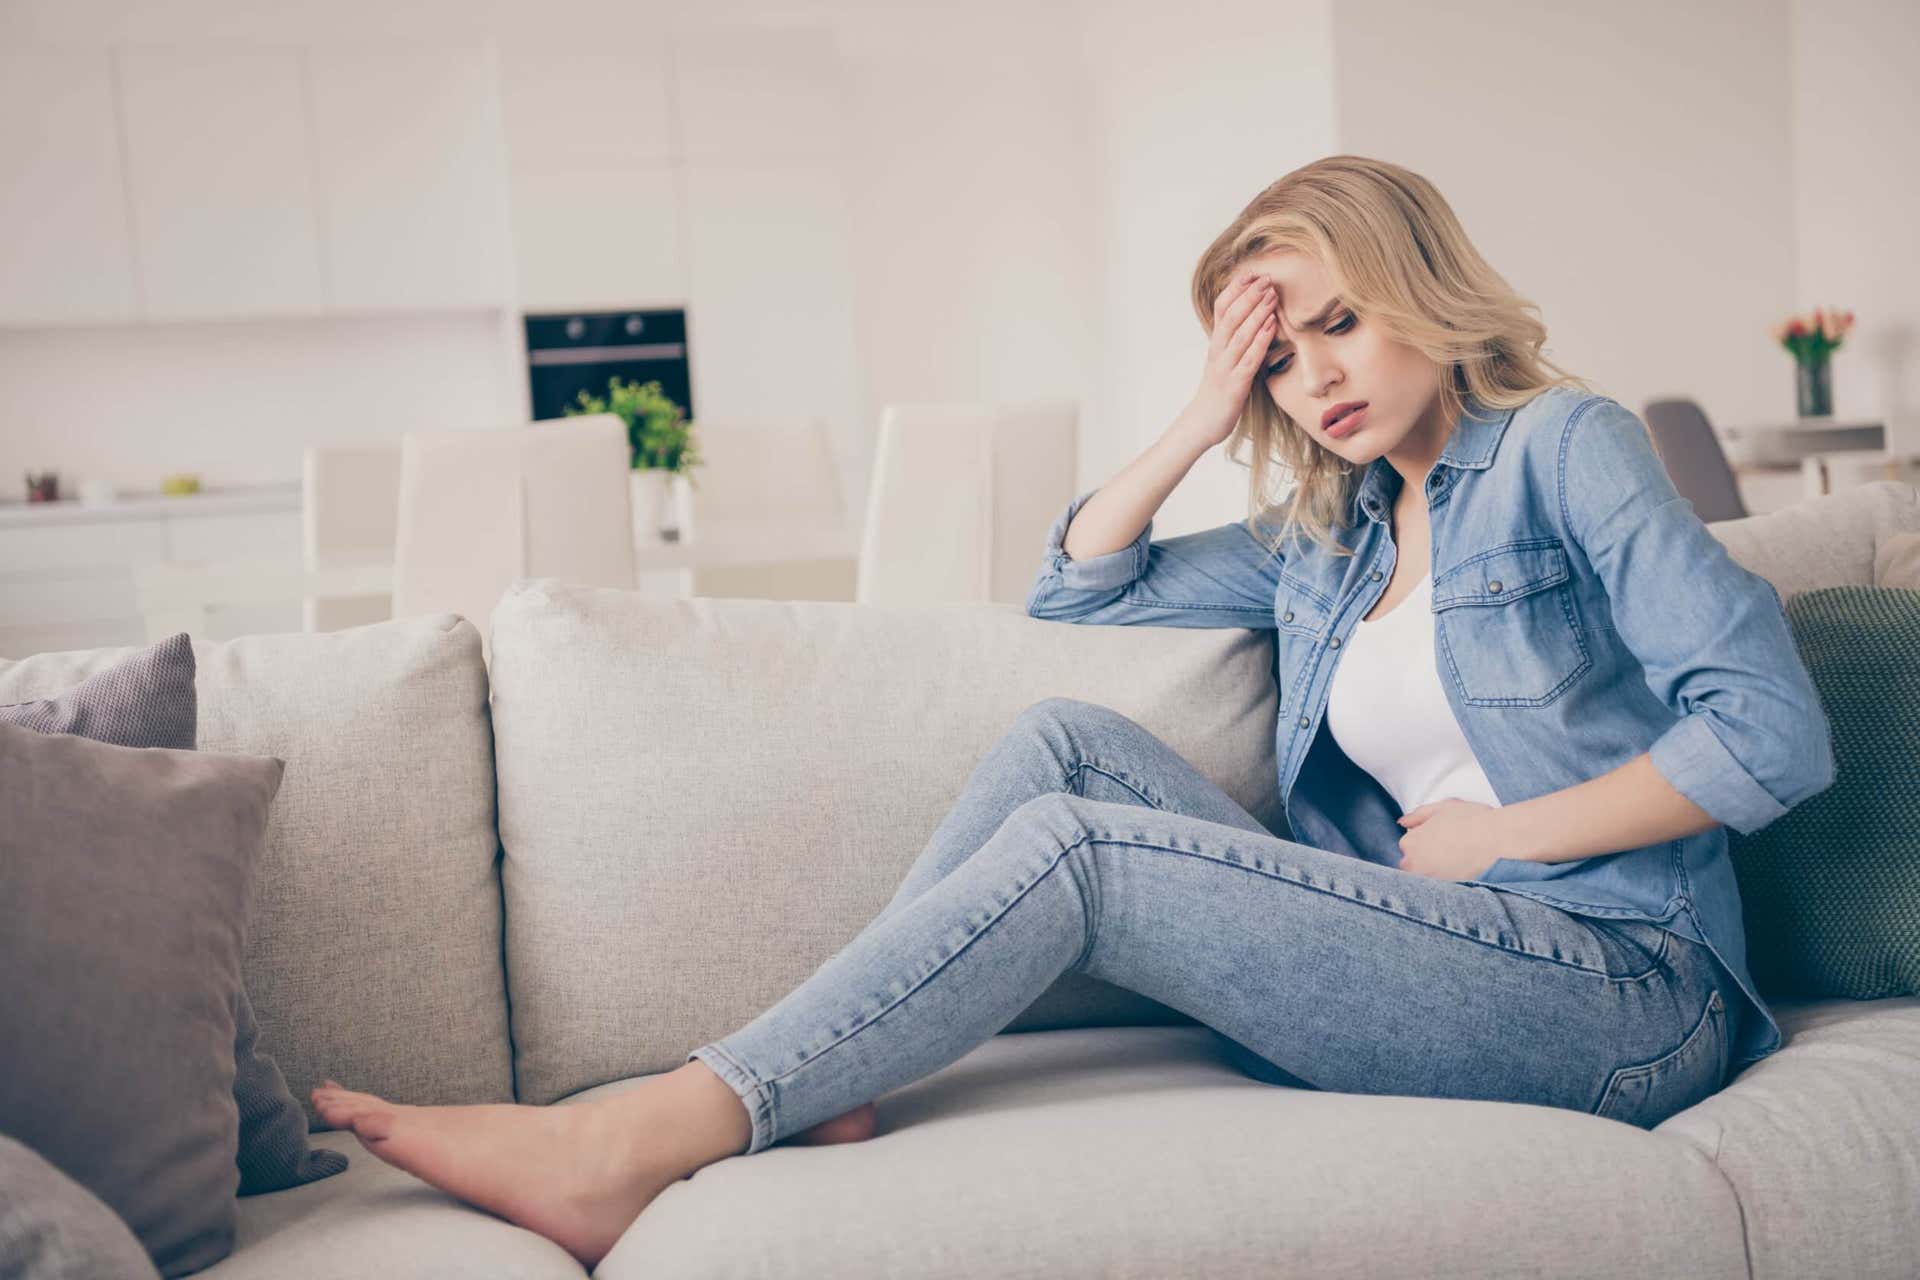 What is menstrual fatigue and how to face it